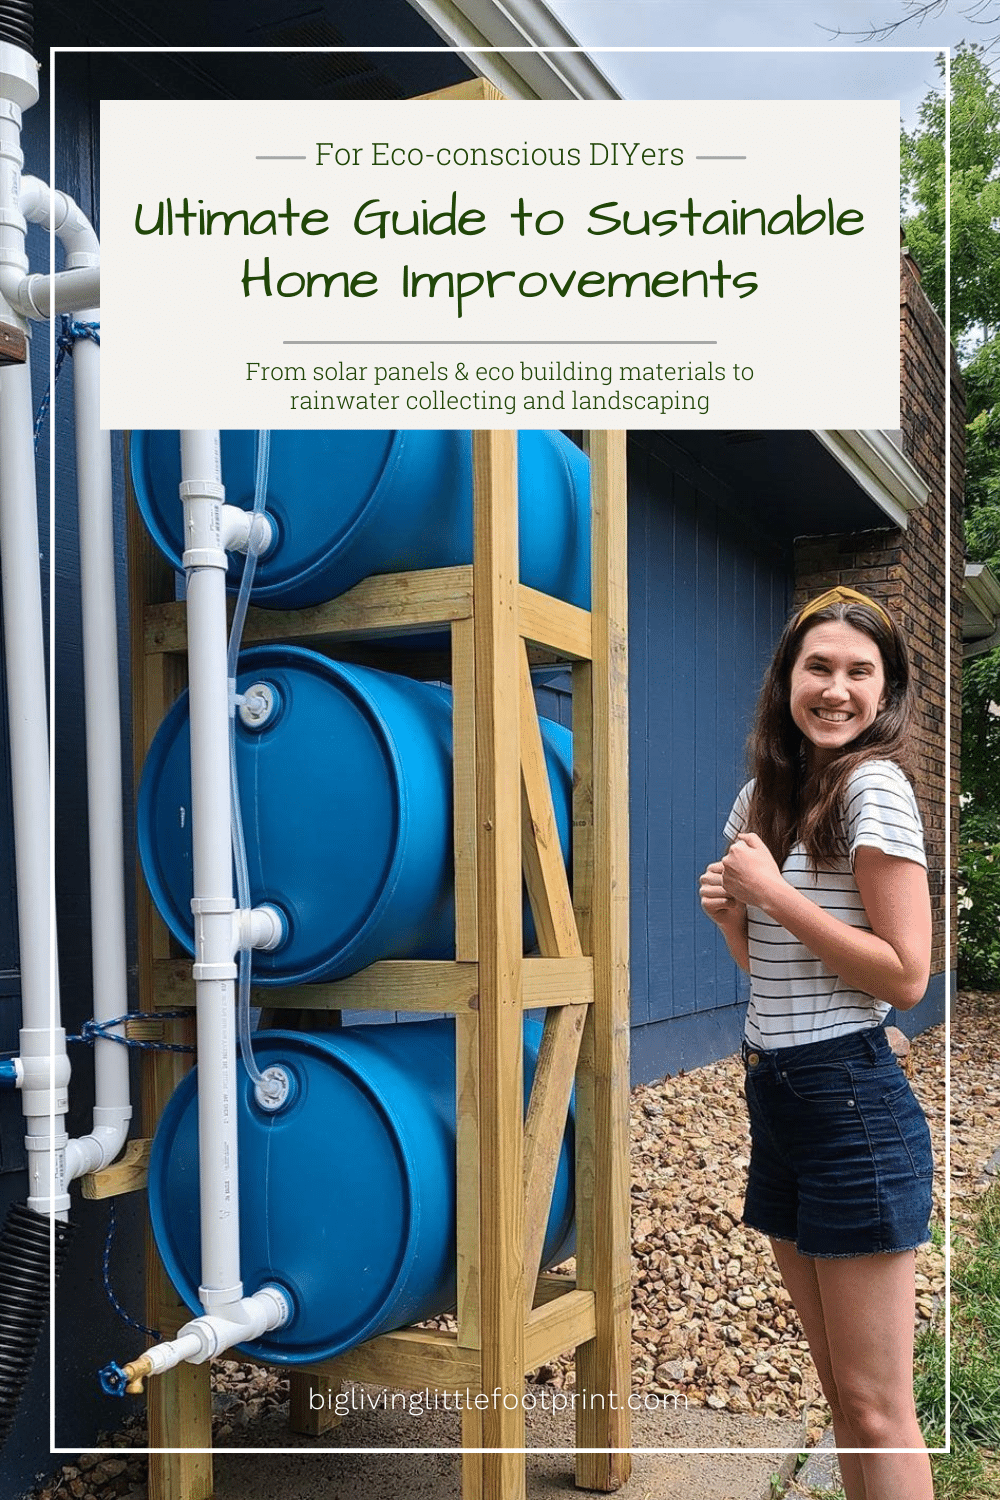 The Ultimate Guide to Sustainable Home Improvements For Eco-conscious DIYers